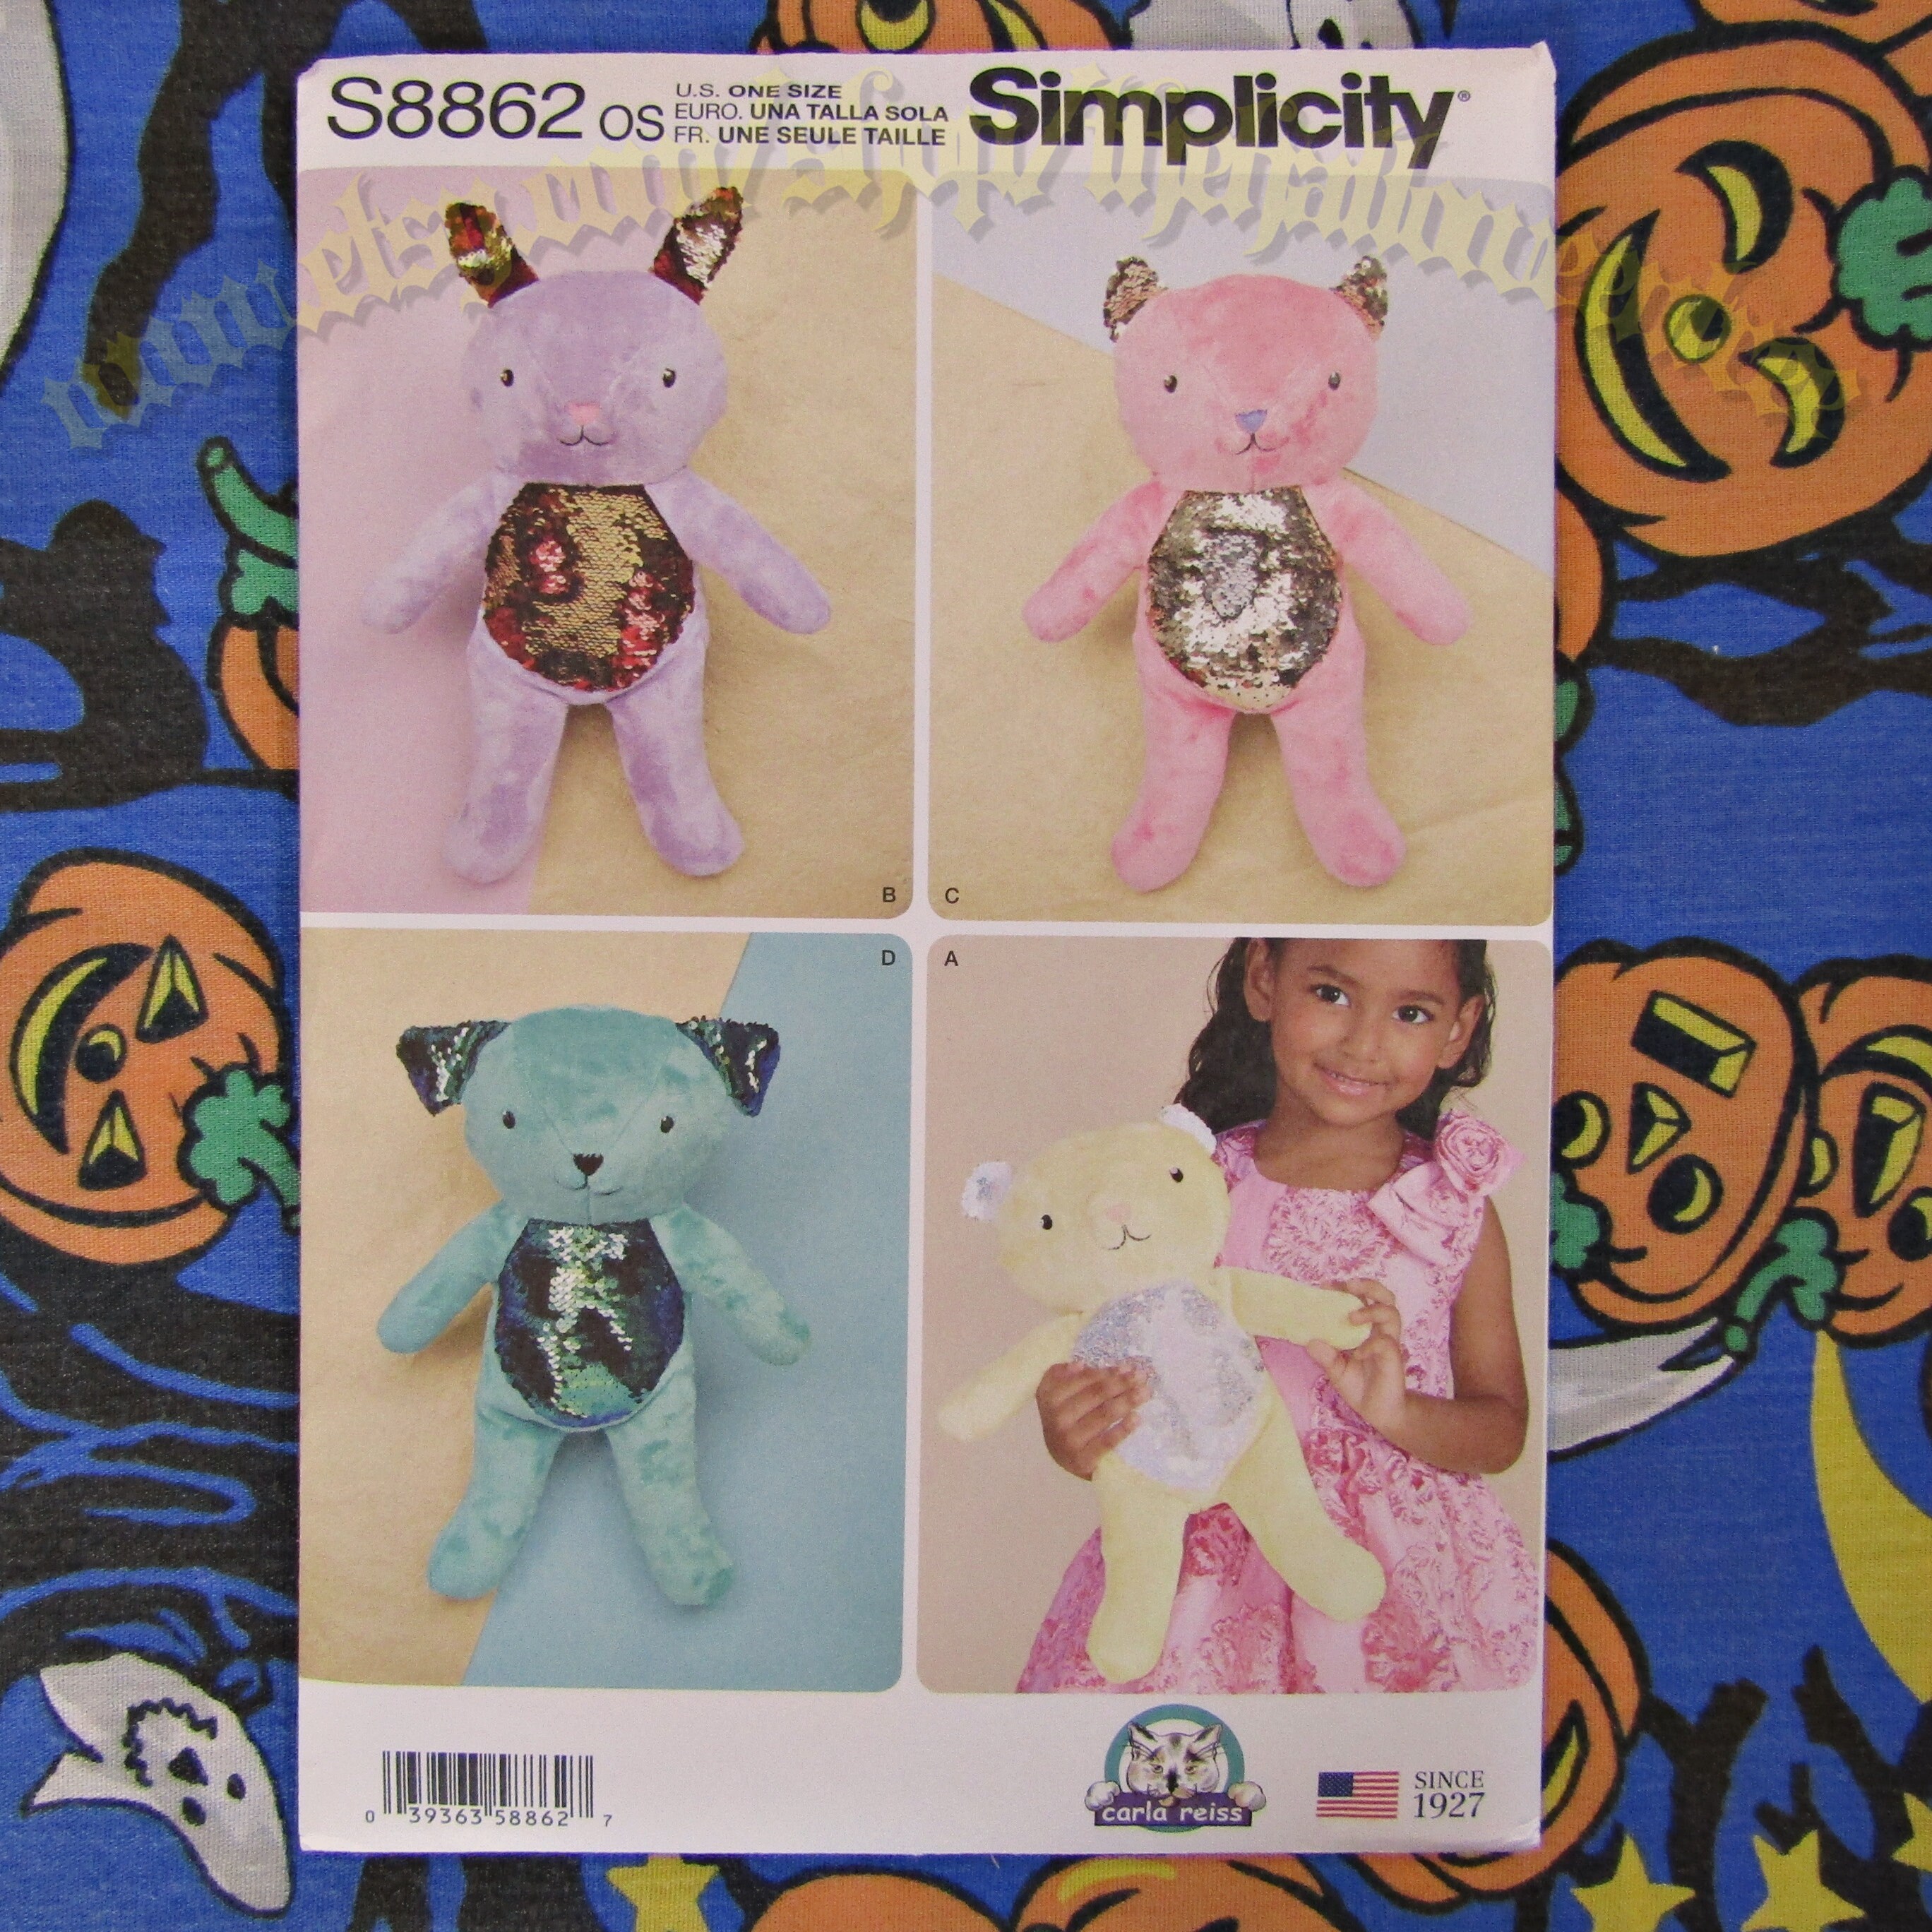 KWIK SEW PATTERNS K3246 Teddy Bears Size Large and Small Pack of 1 White